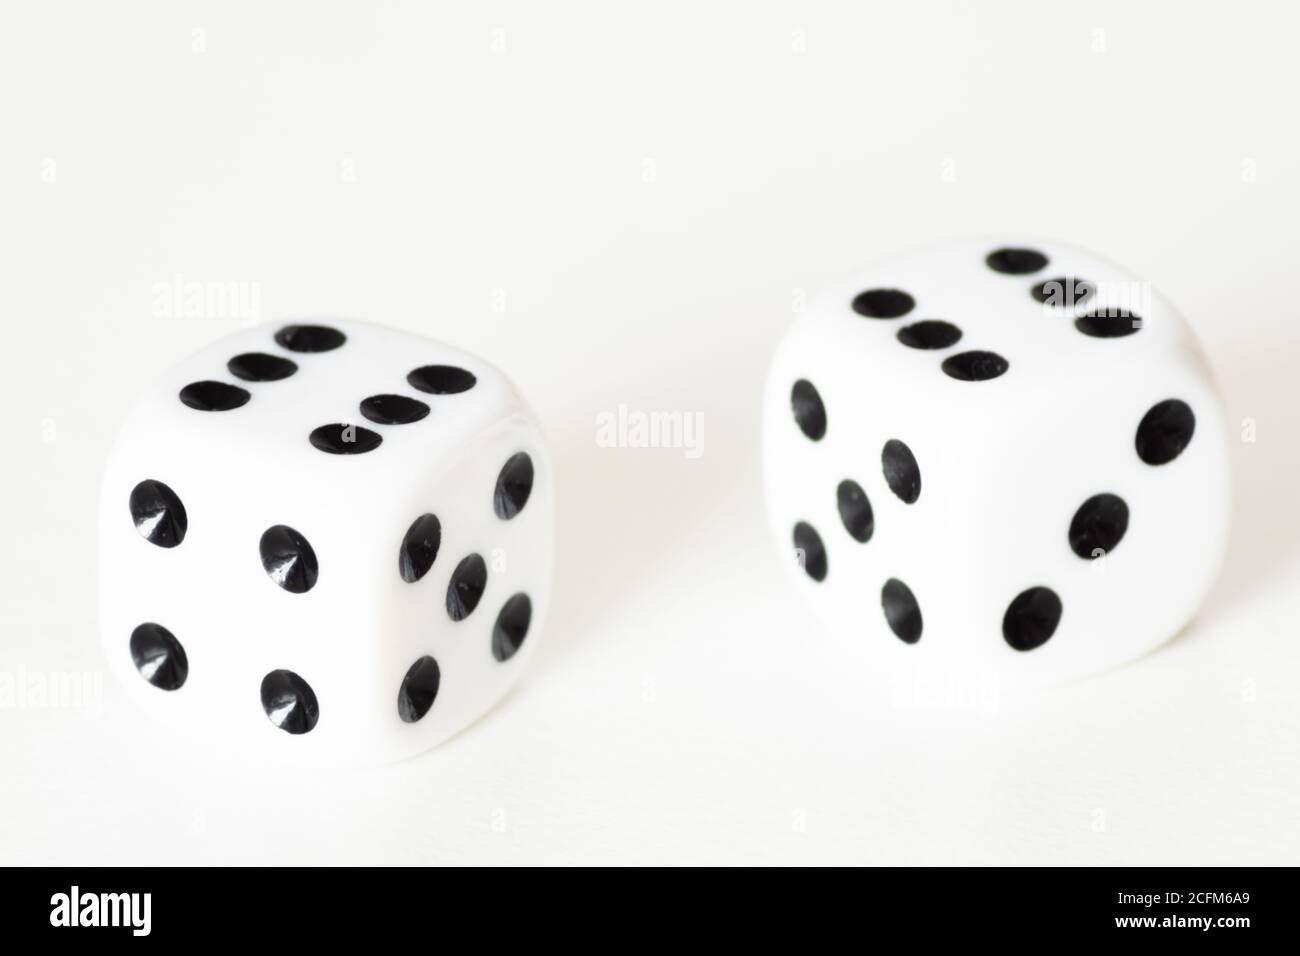 Traditional dice or die against white background. Luck, lucky, roll of the dice, luck of the draw, take a chance, Stock Photo